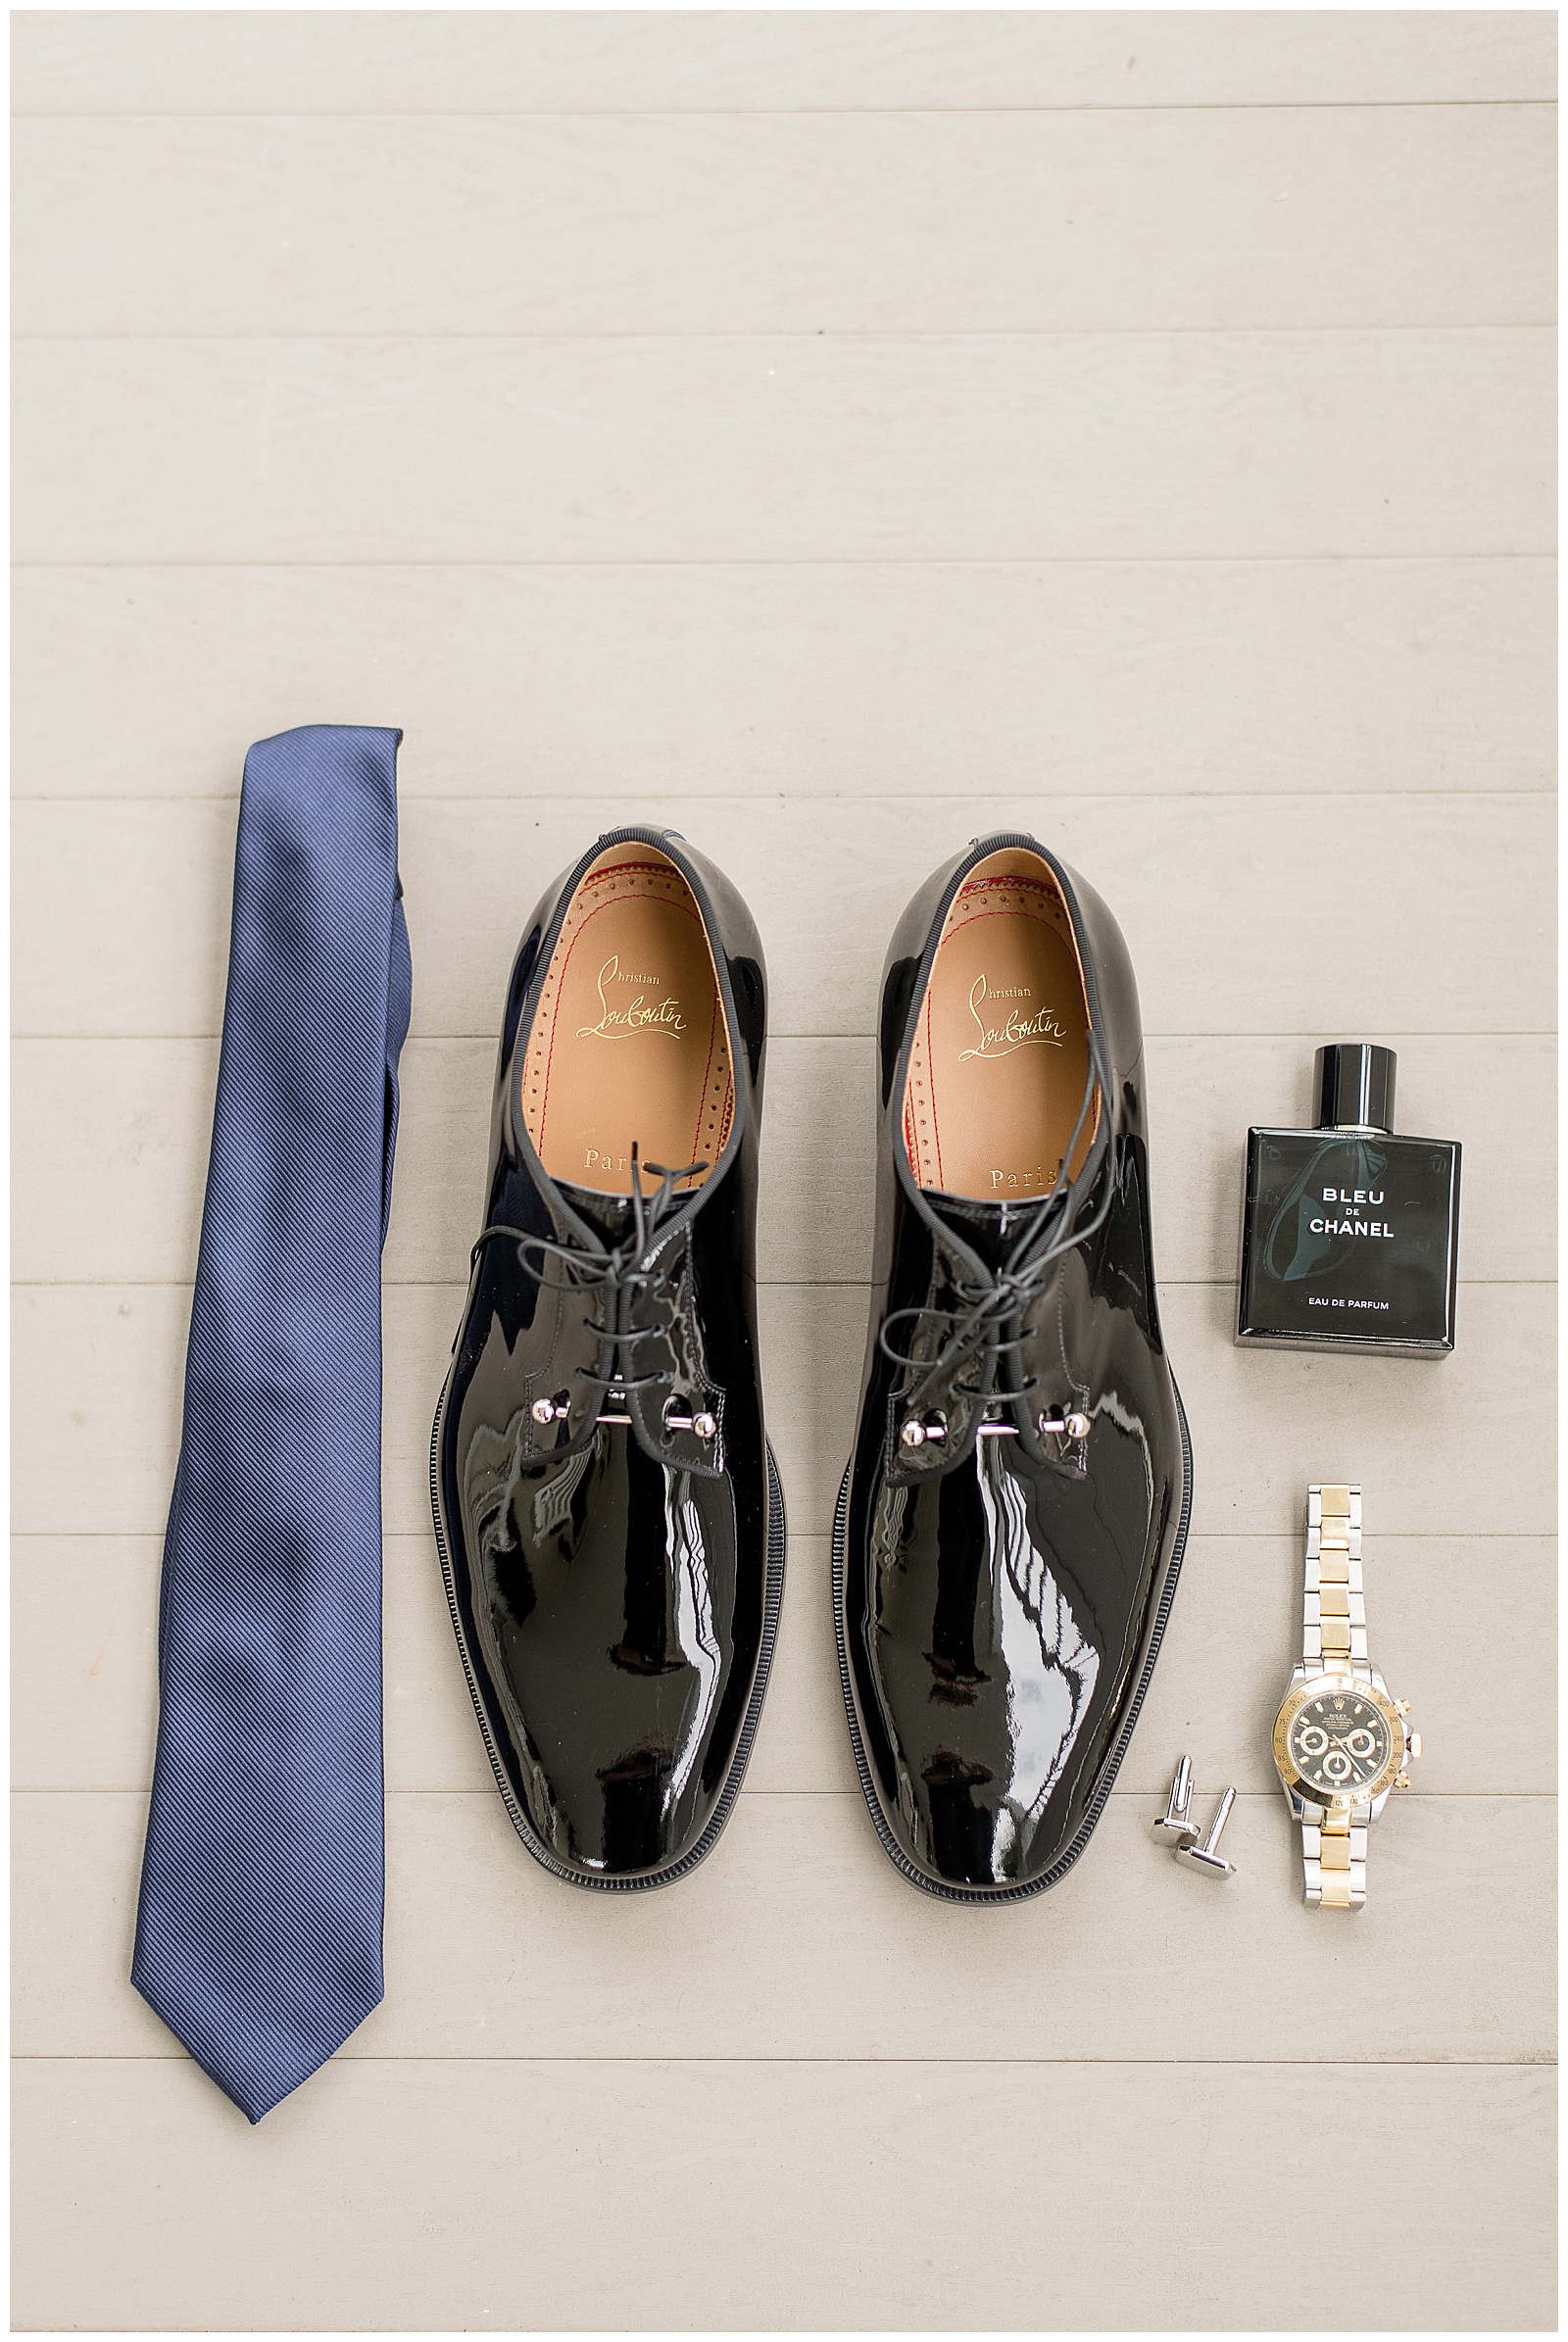 groom's shoes, navy blue tie, cologne, cuff links and watch displayed on off-white wooden floor boards at Antrim 1844